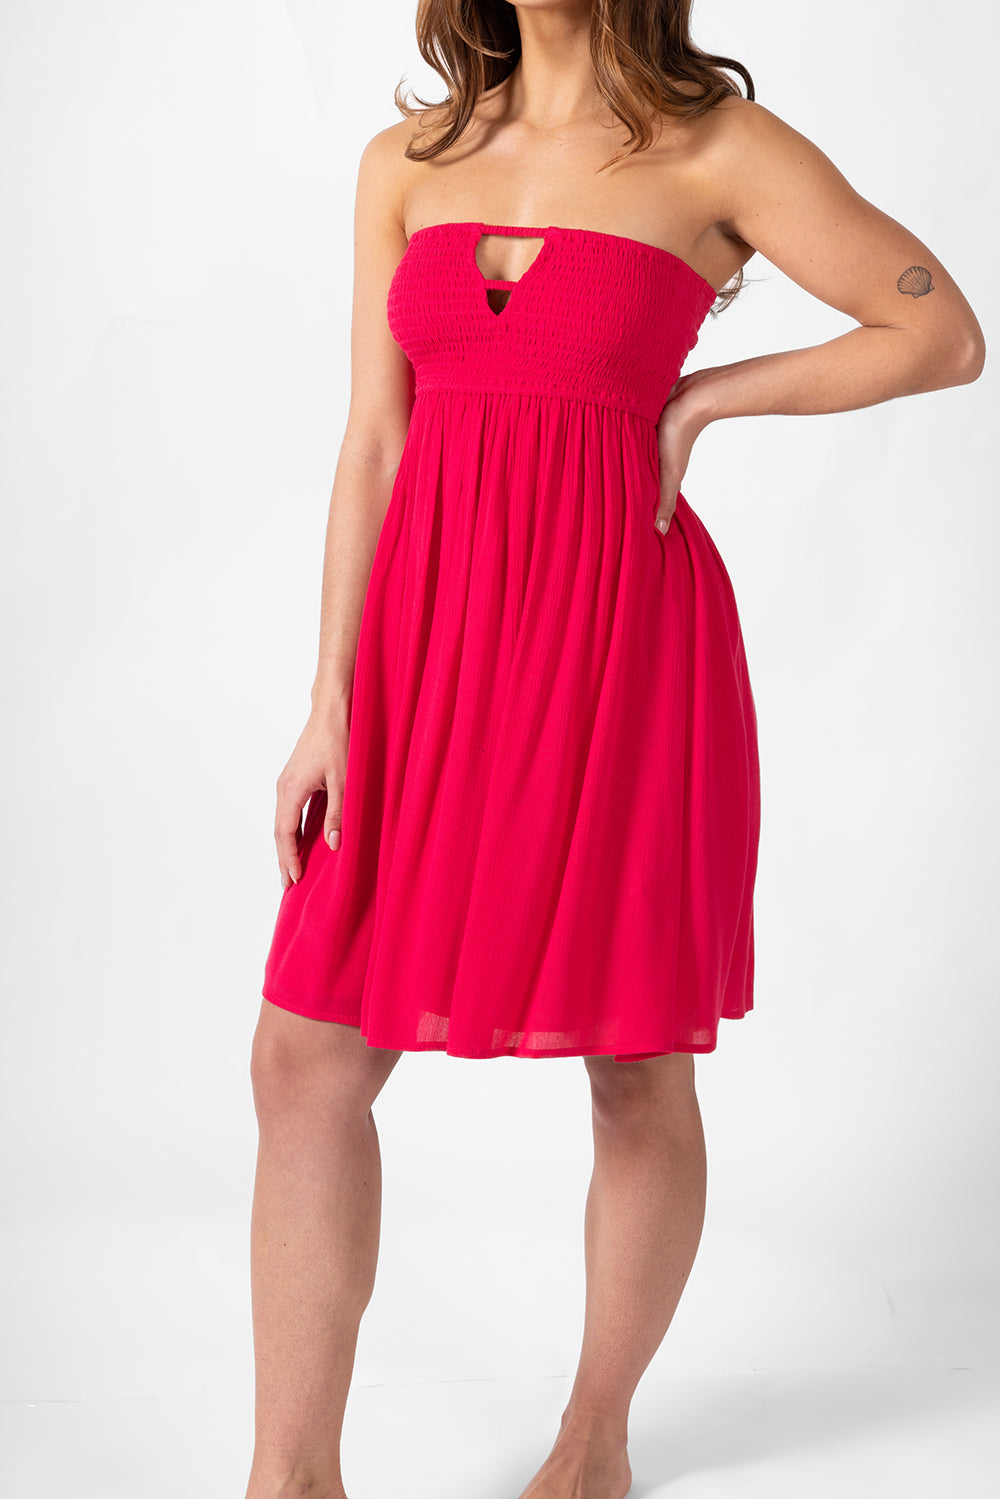 a woman model wearing a hot pink smocked bandeau mini dress with one hand on her wasit